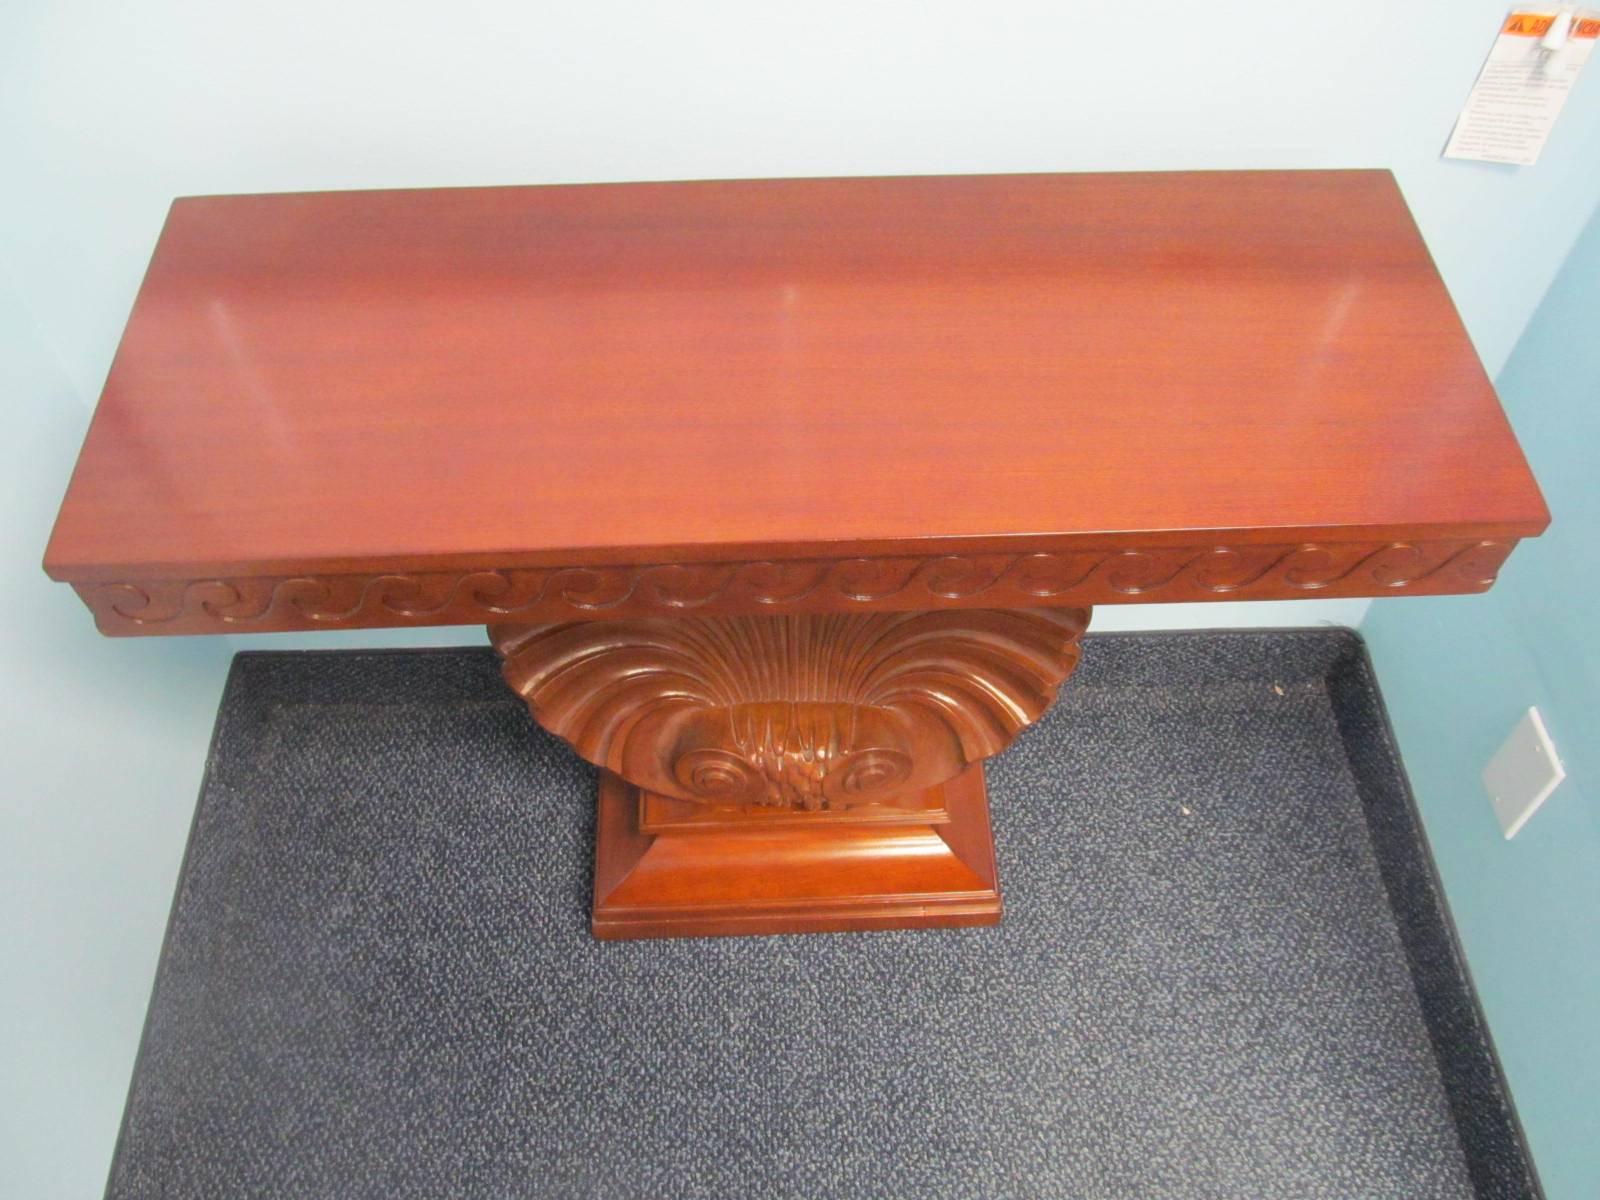 Wonderful signed model 3050 shell console table by Edward Wormley for Dunbar.